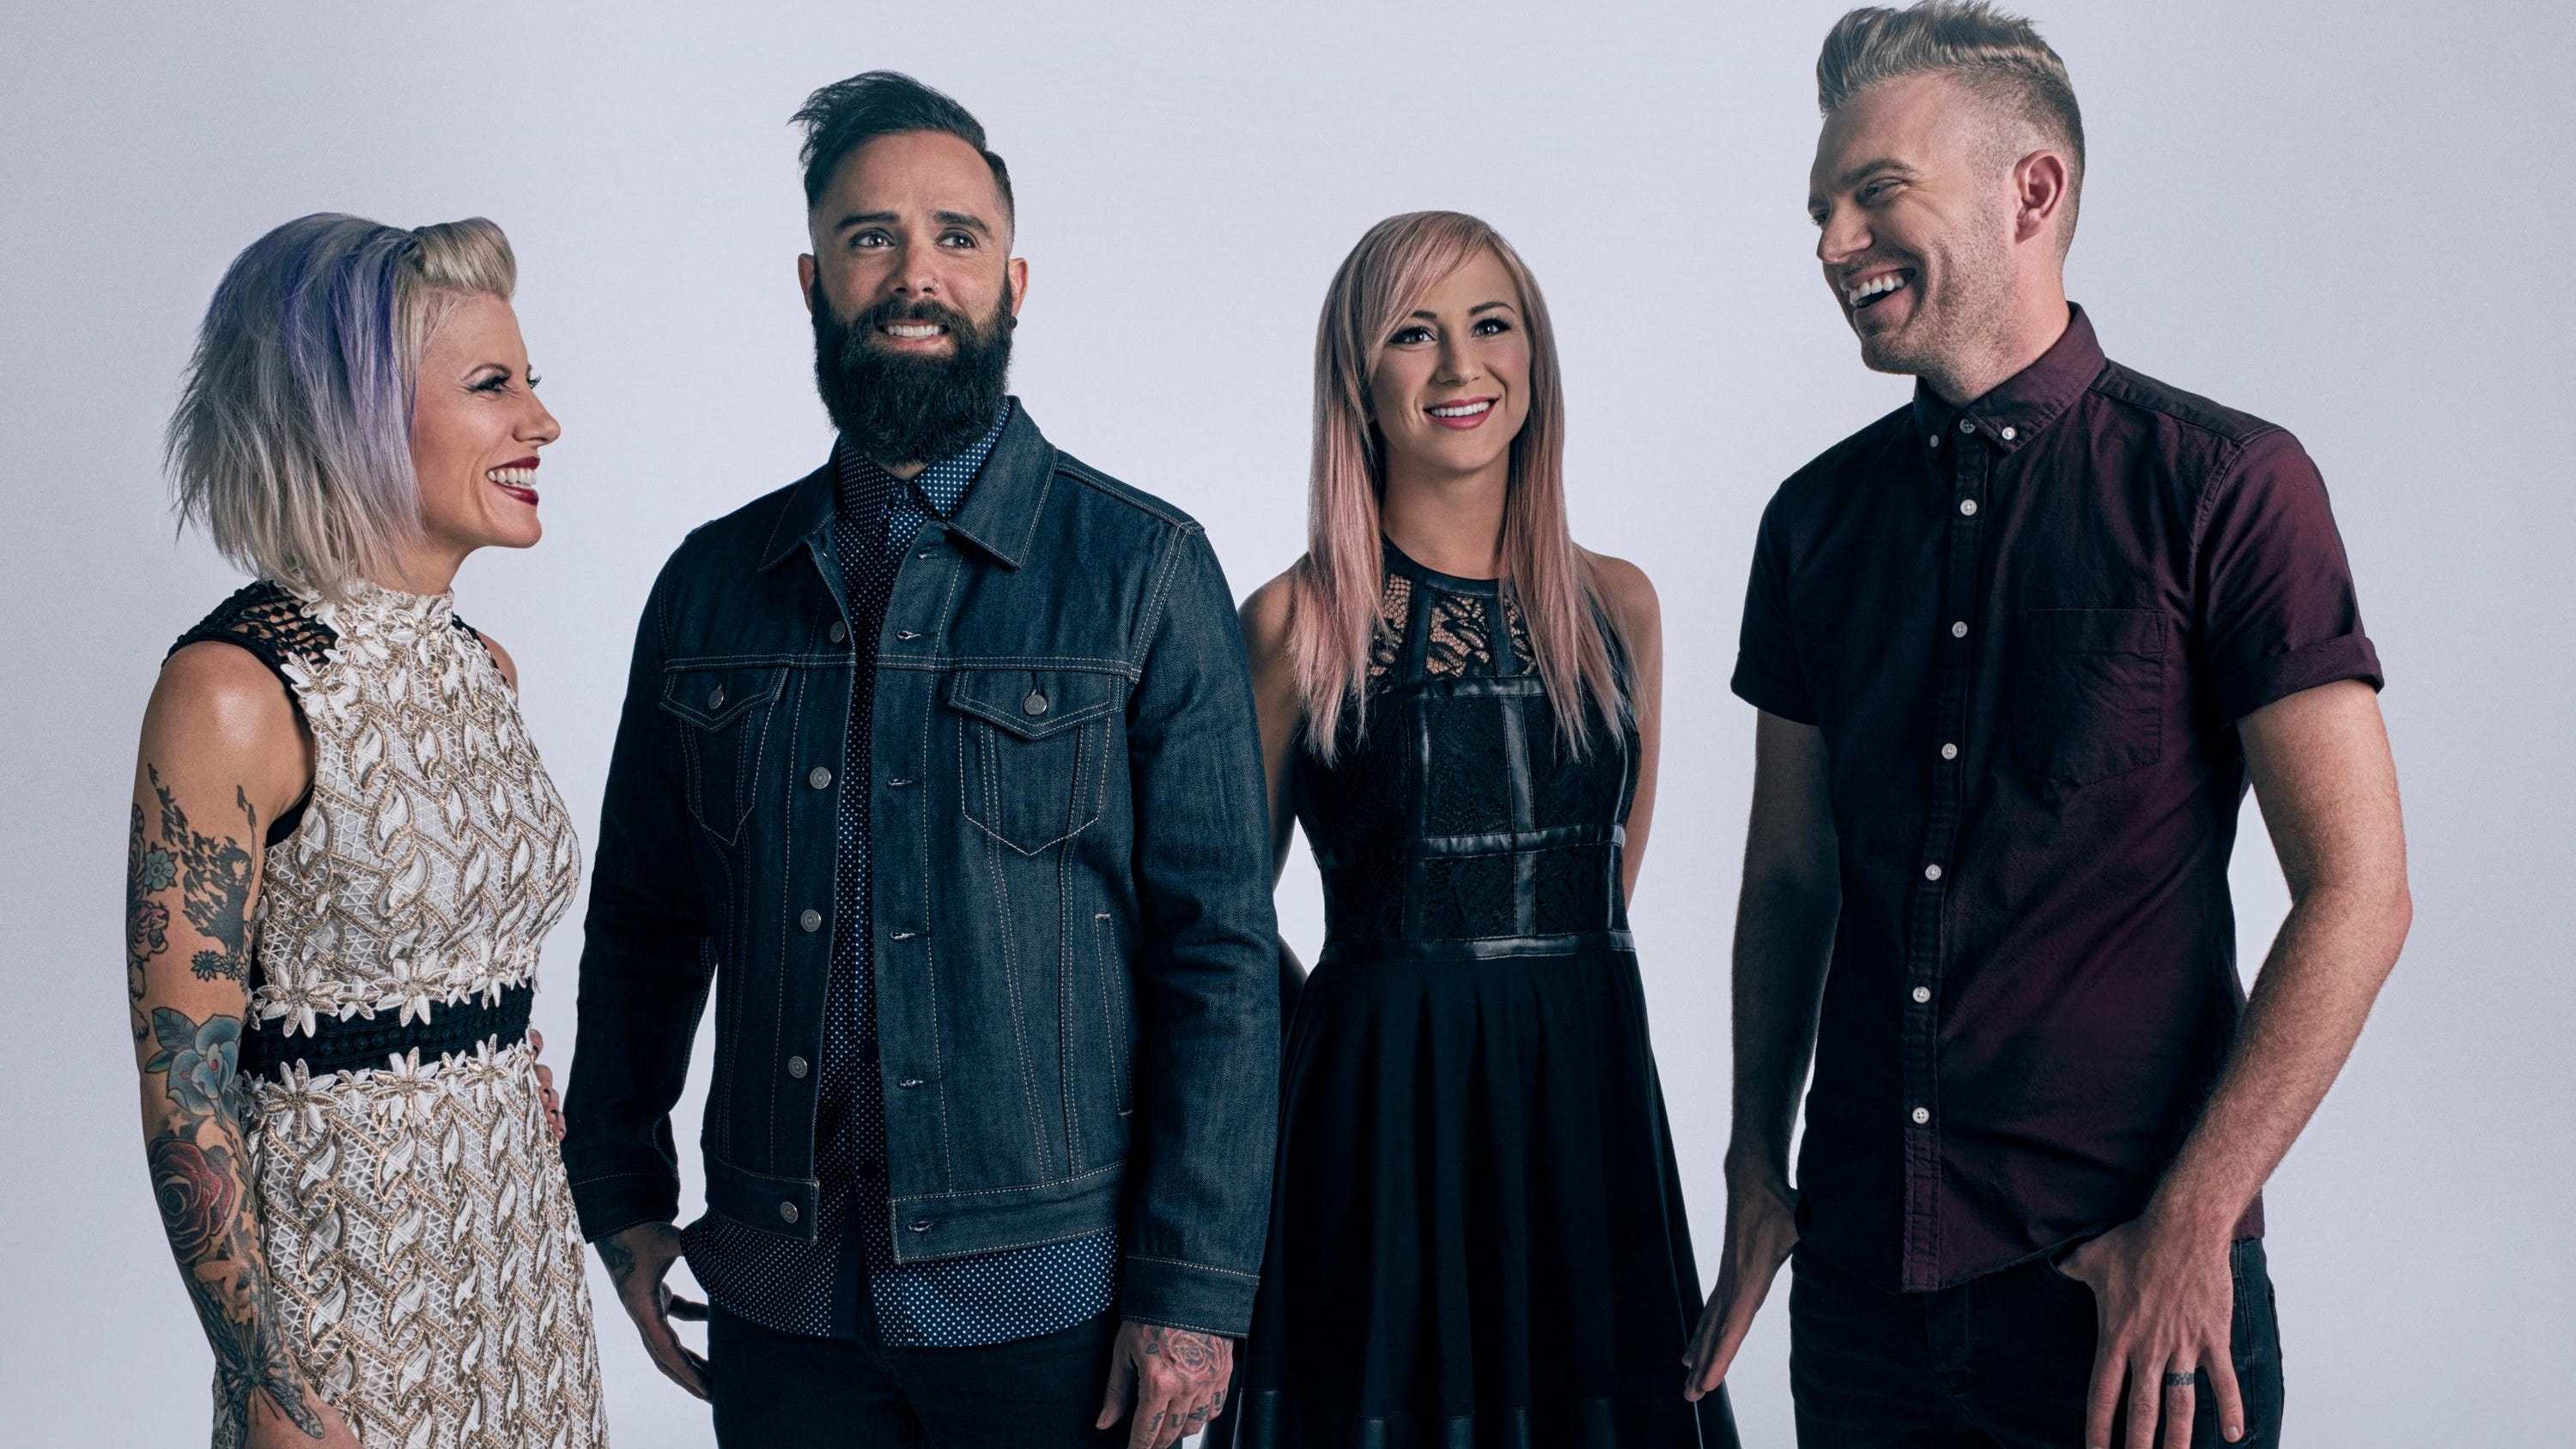 Skillet is ready to rock Des Moines' Winter Jam Spectacular